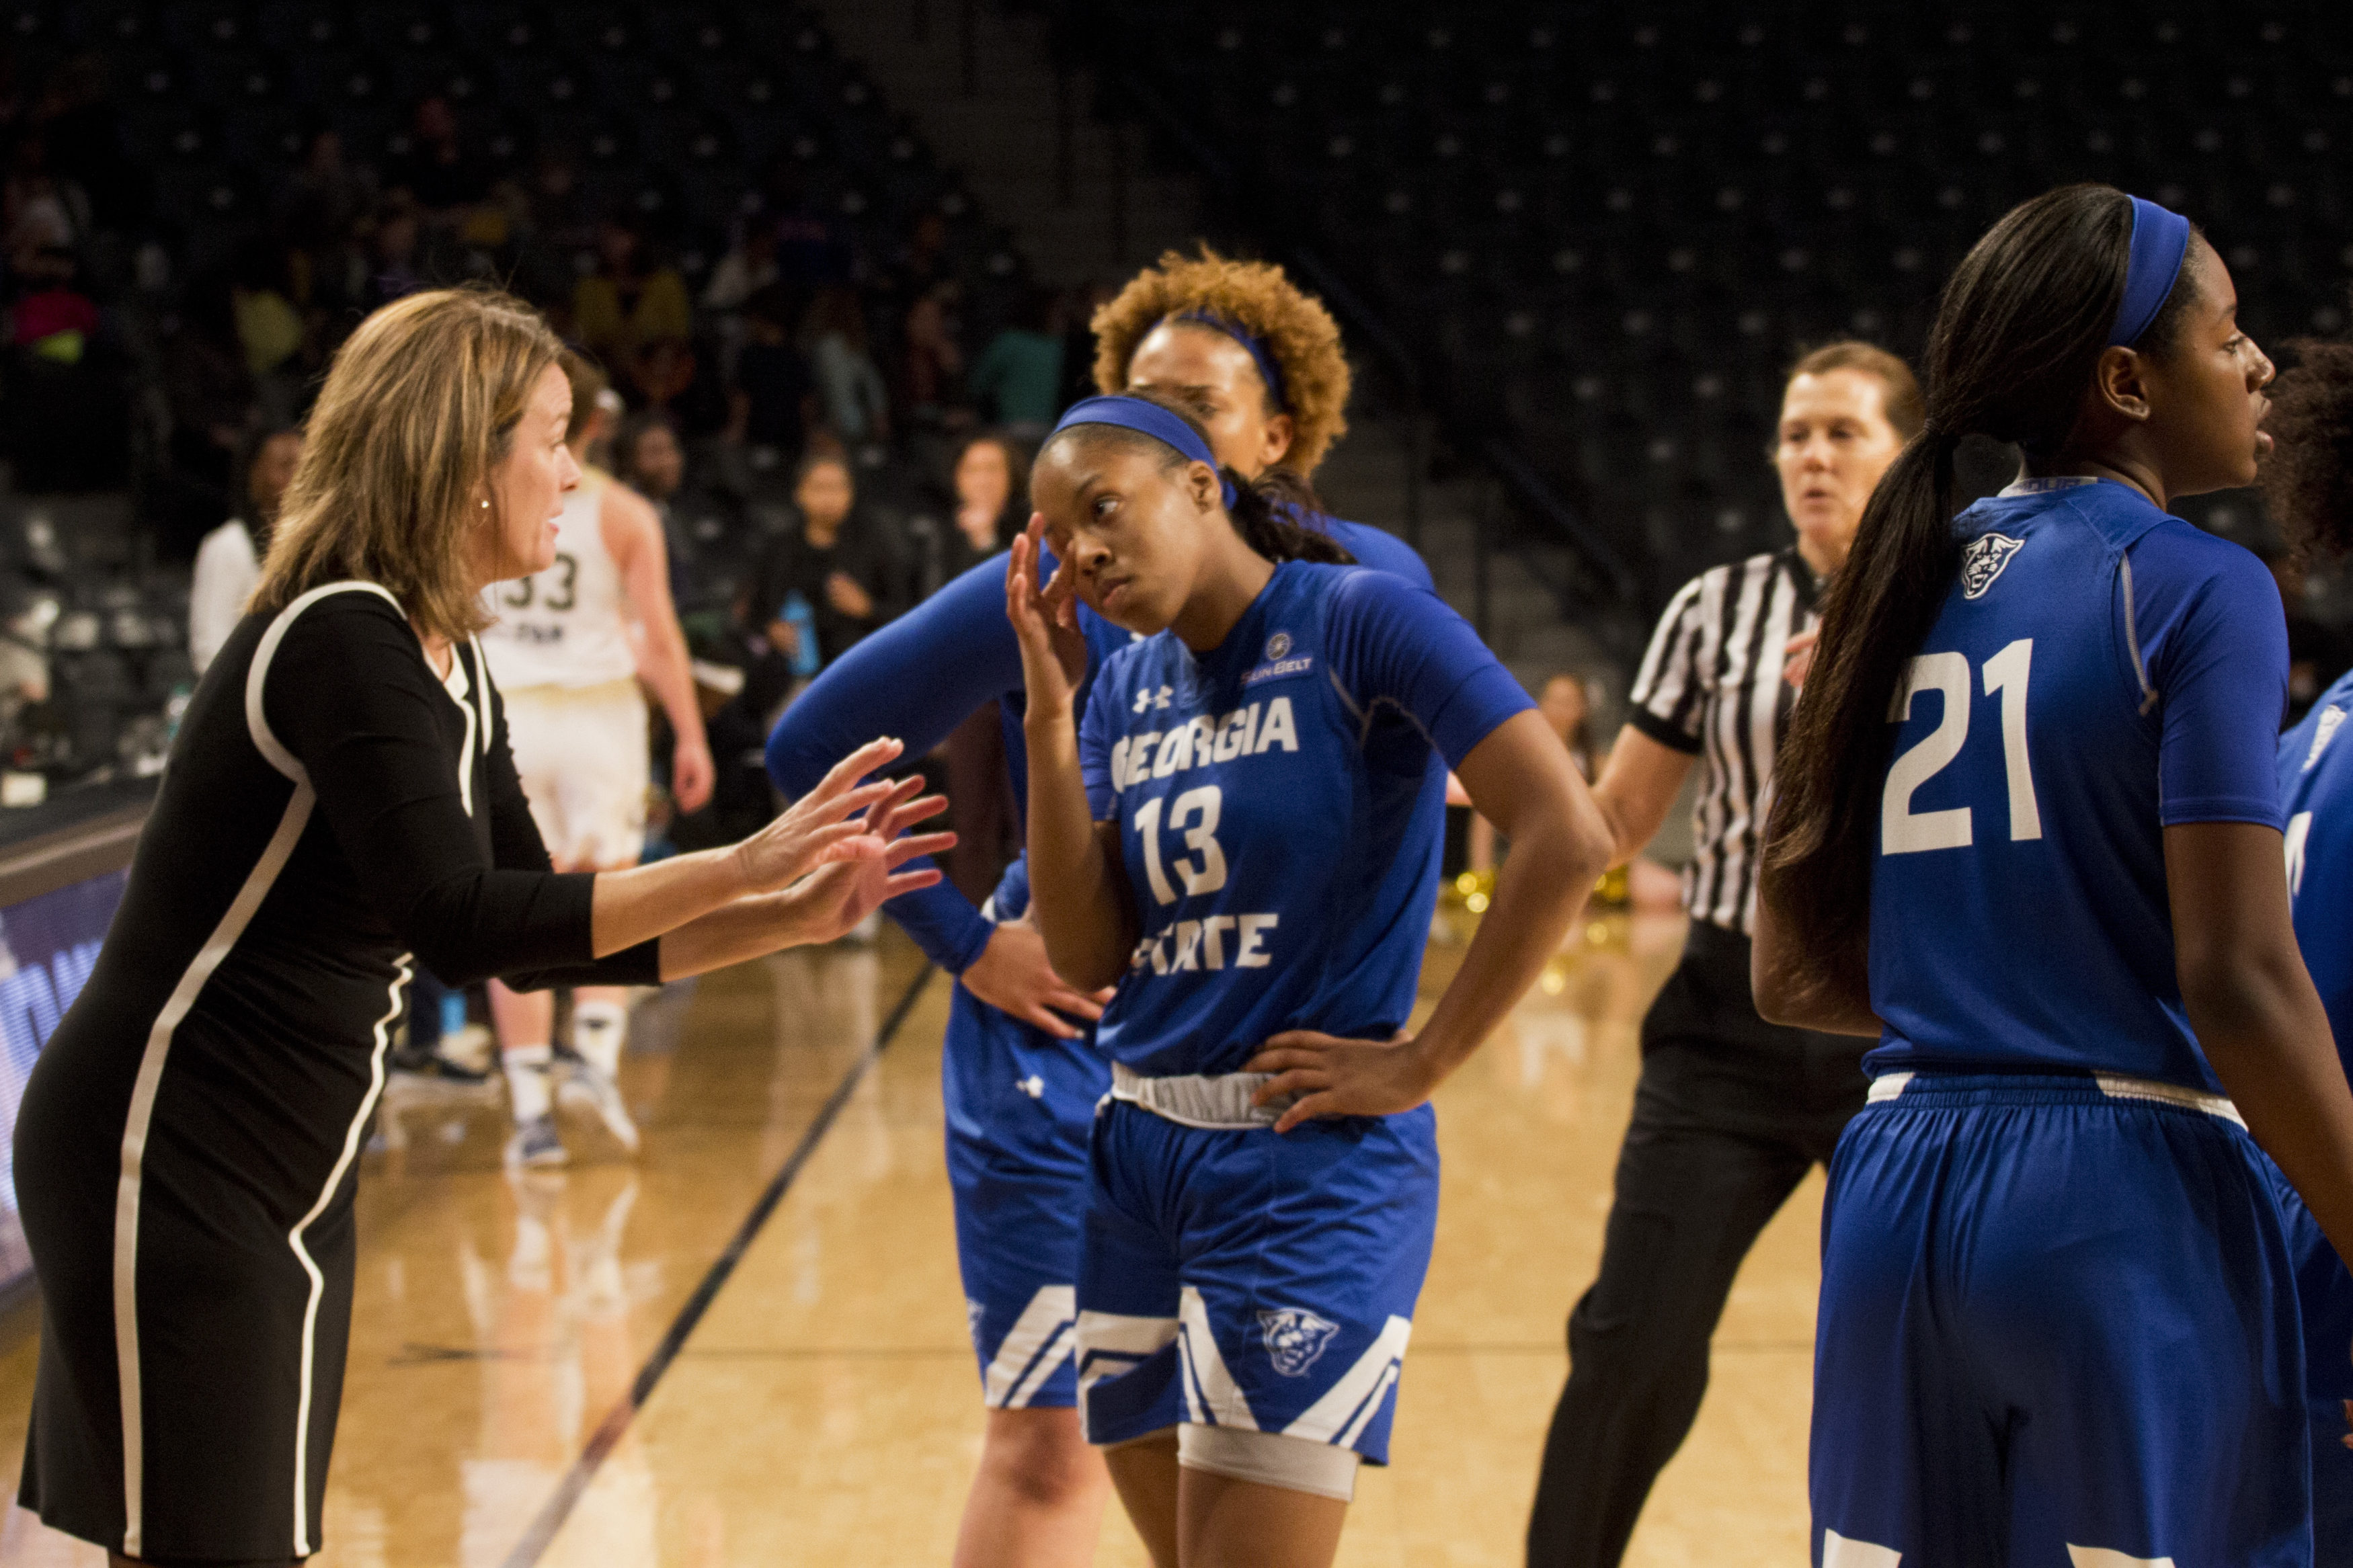 Georgia State women’s basketball team remains to play hard, but the